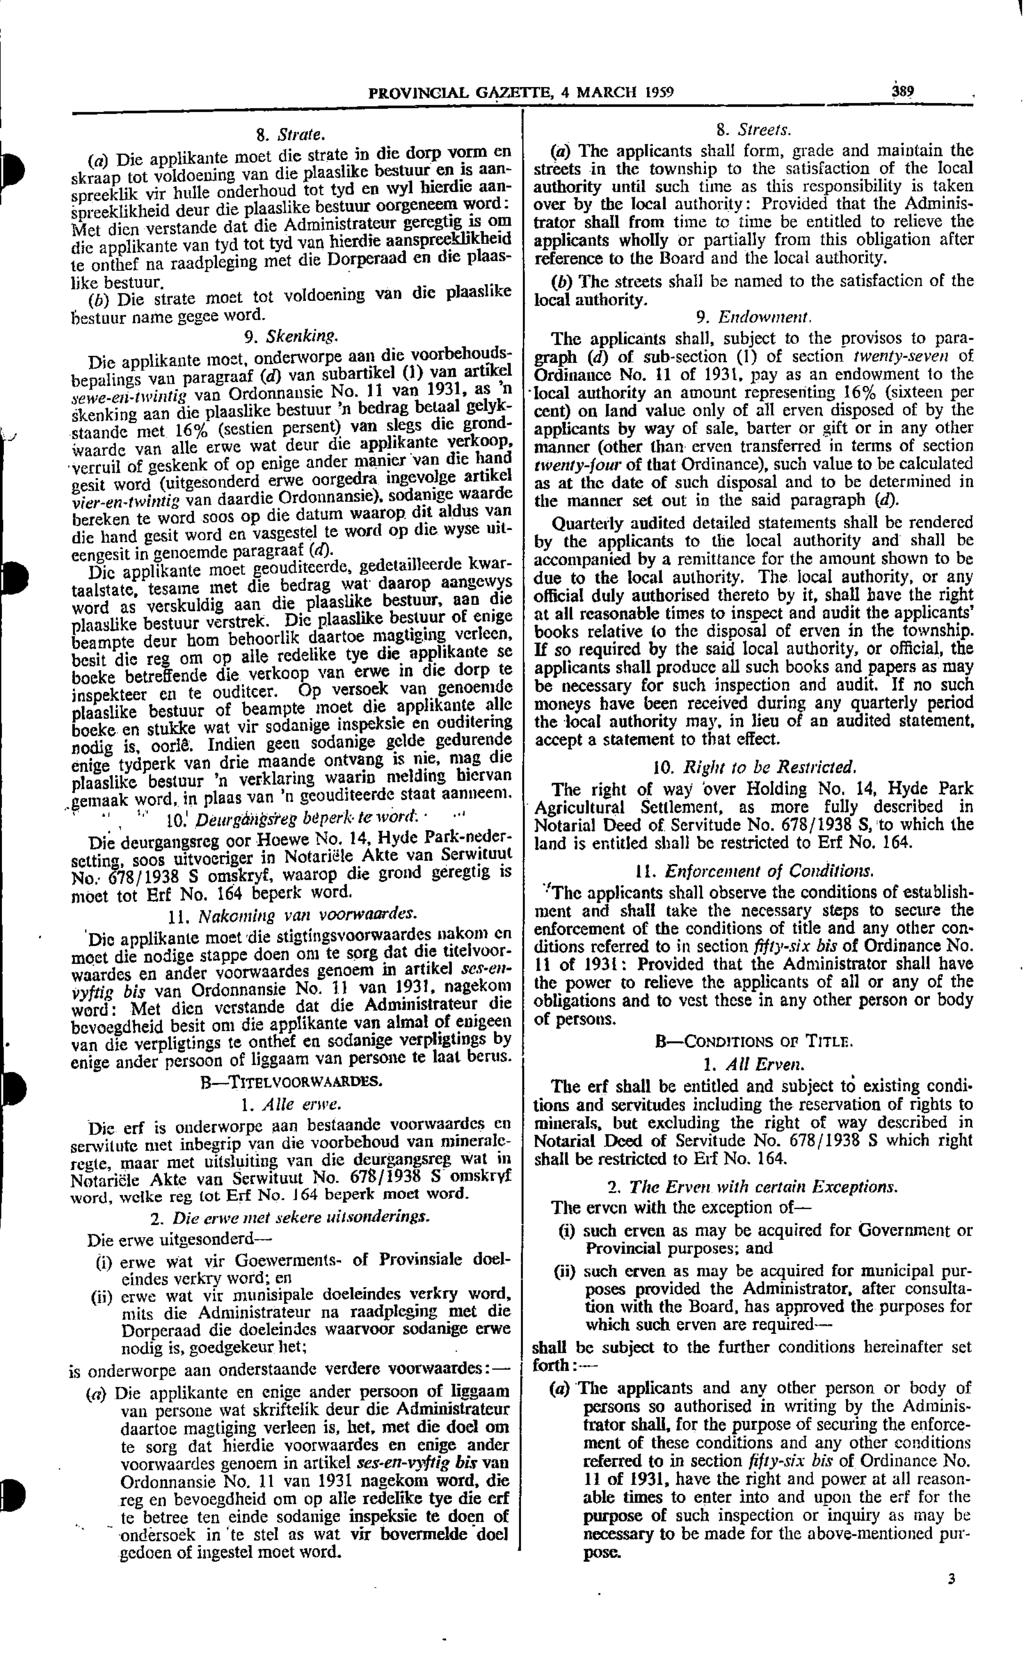 1 i PROVINCIAL GAZETTE 4 MARCH 1959 389 8 Striae 8 Streets (a) Die applikante moet die strate in die dorp vorm en (a) The applicants shall form grade and maintain the streets skraap tot voldoening